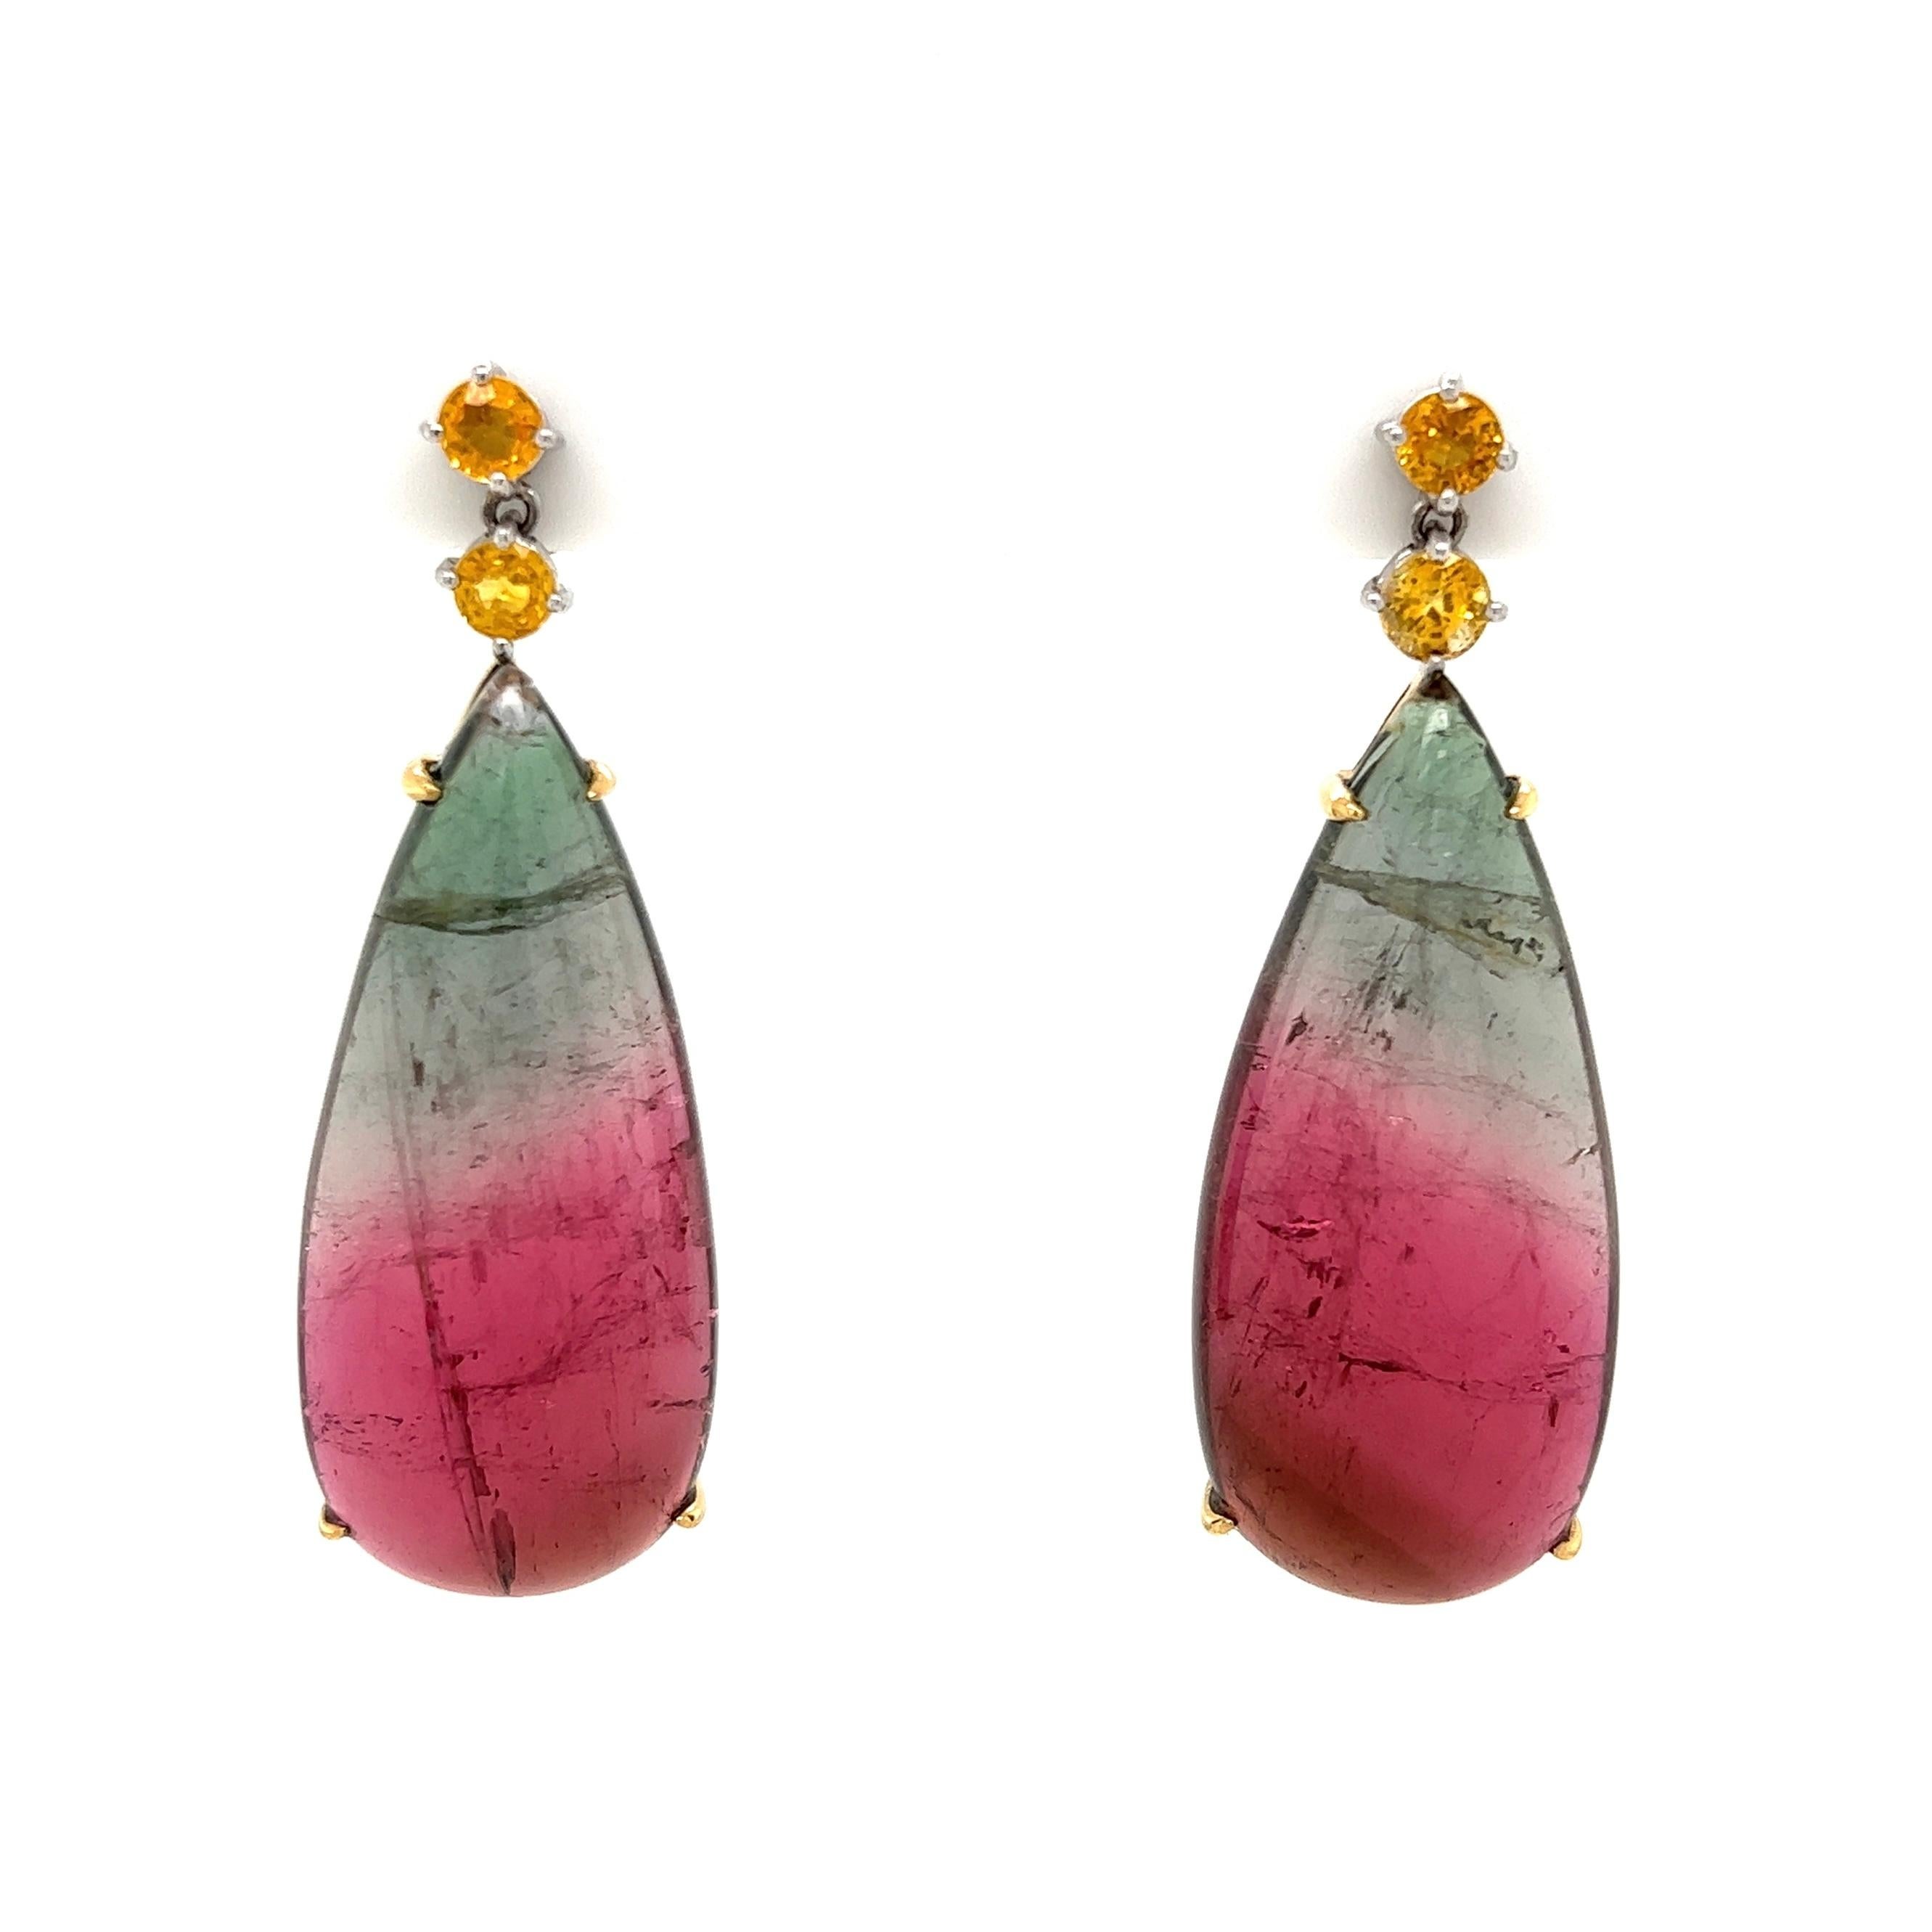 Beautiful pair of Bi-Color 45tcw Tourmaline and 1.20tcw Yellow Sapphire Earrings. Hand crafted 18K Yellow Gold mounting. Approx. Dimensions: 1.75” long x 0.65” wide. More Beautiful in real time...Sure to be admired, a piece you’ll turn to time and